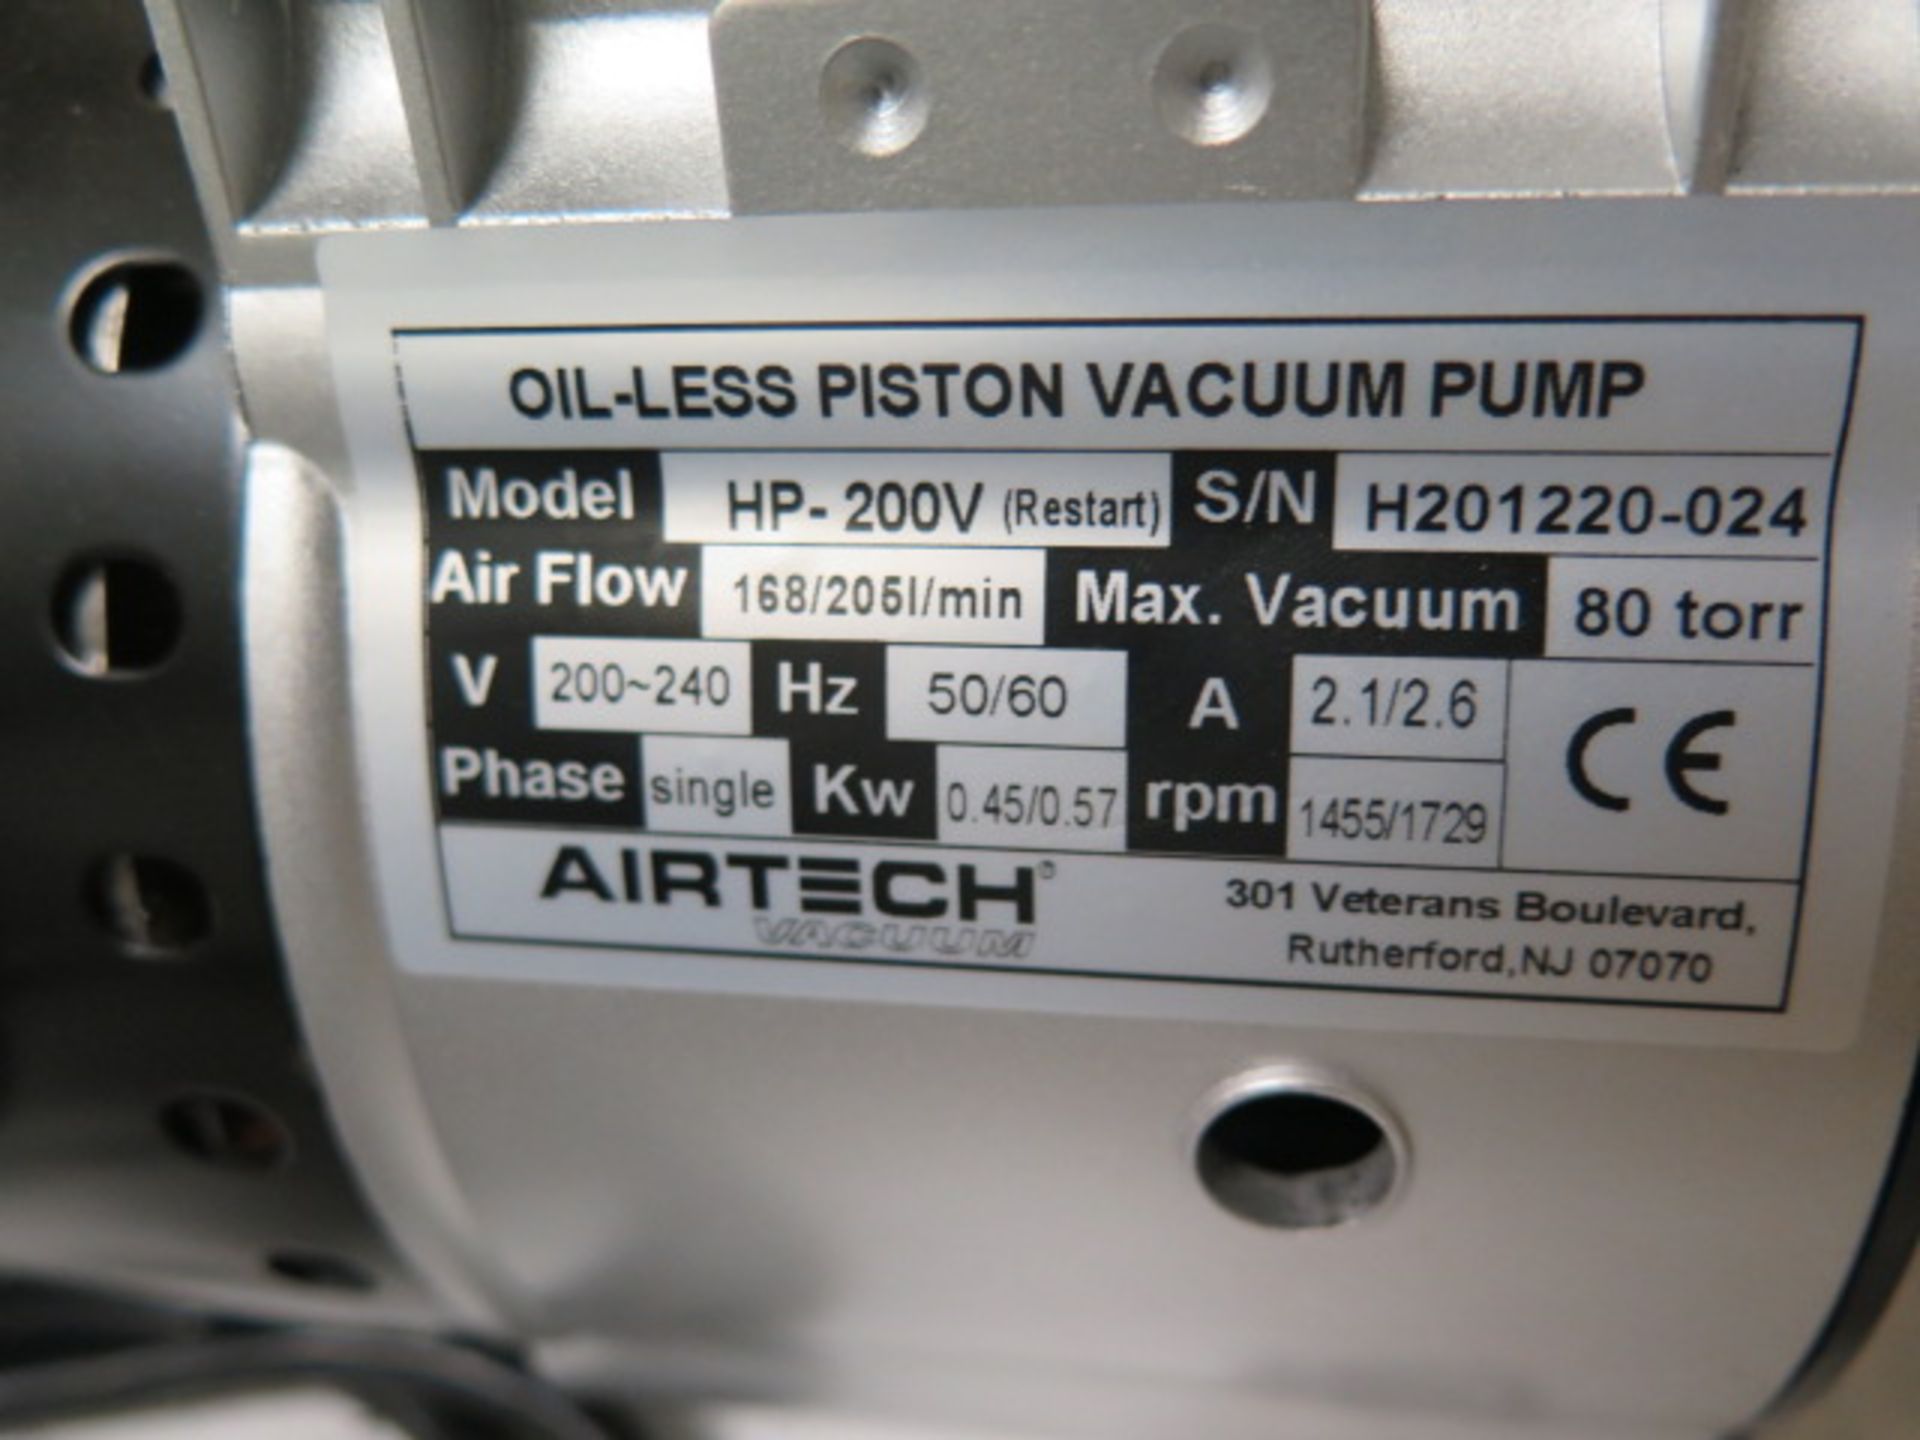 Airtech HP-200V 80 torr Vacuum Pumps (2) 200-240V (SOLD AS-IS - NO WARRANTY) - Image 4 of 4